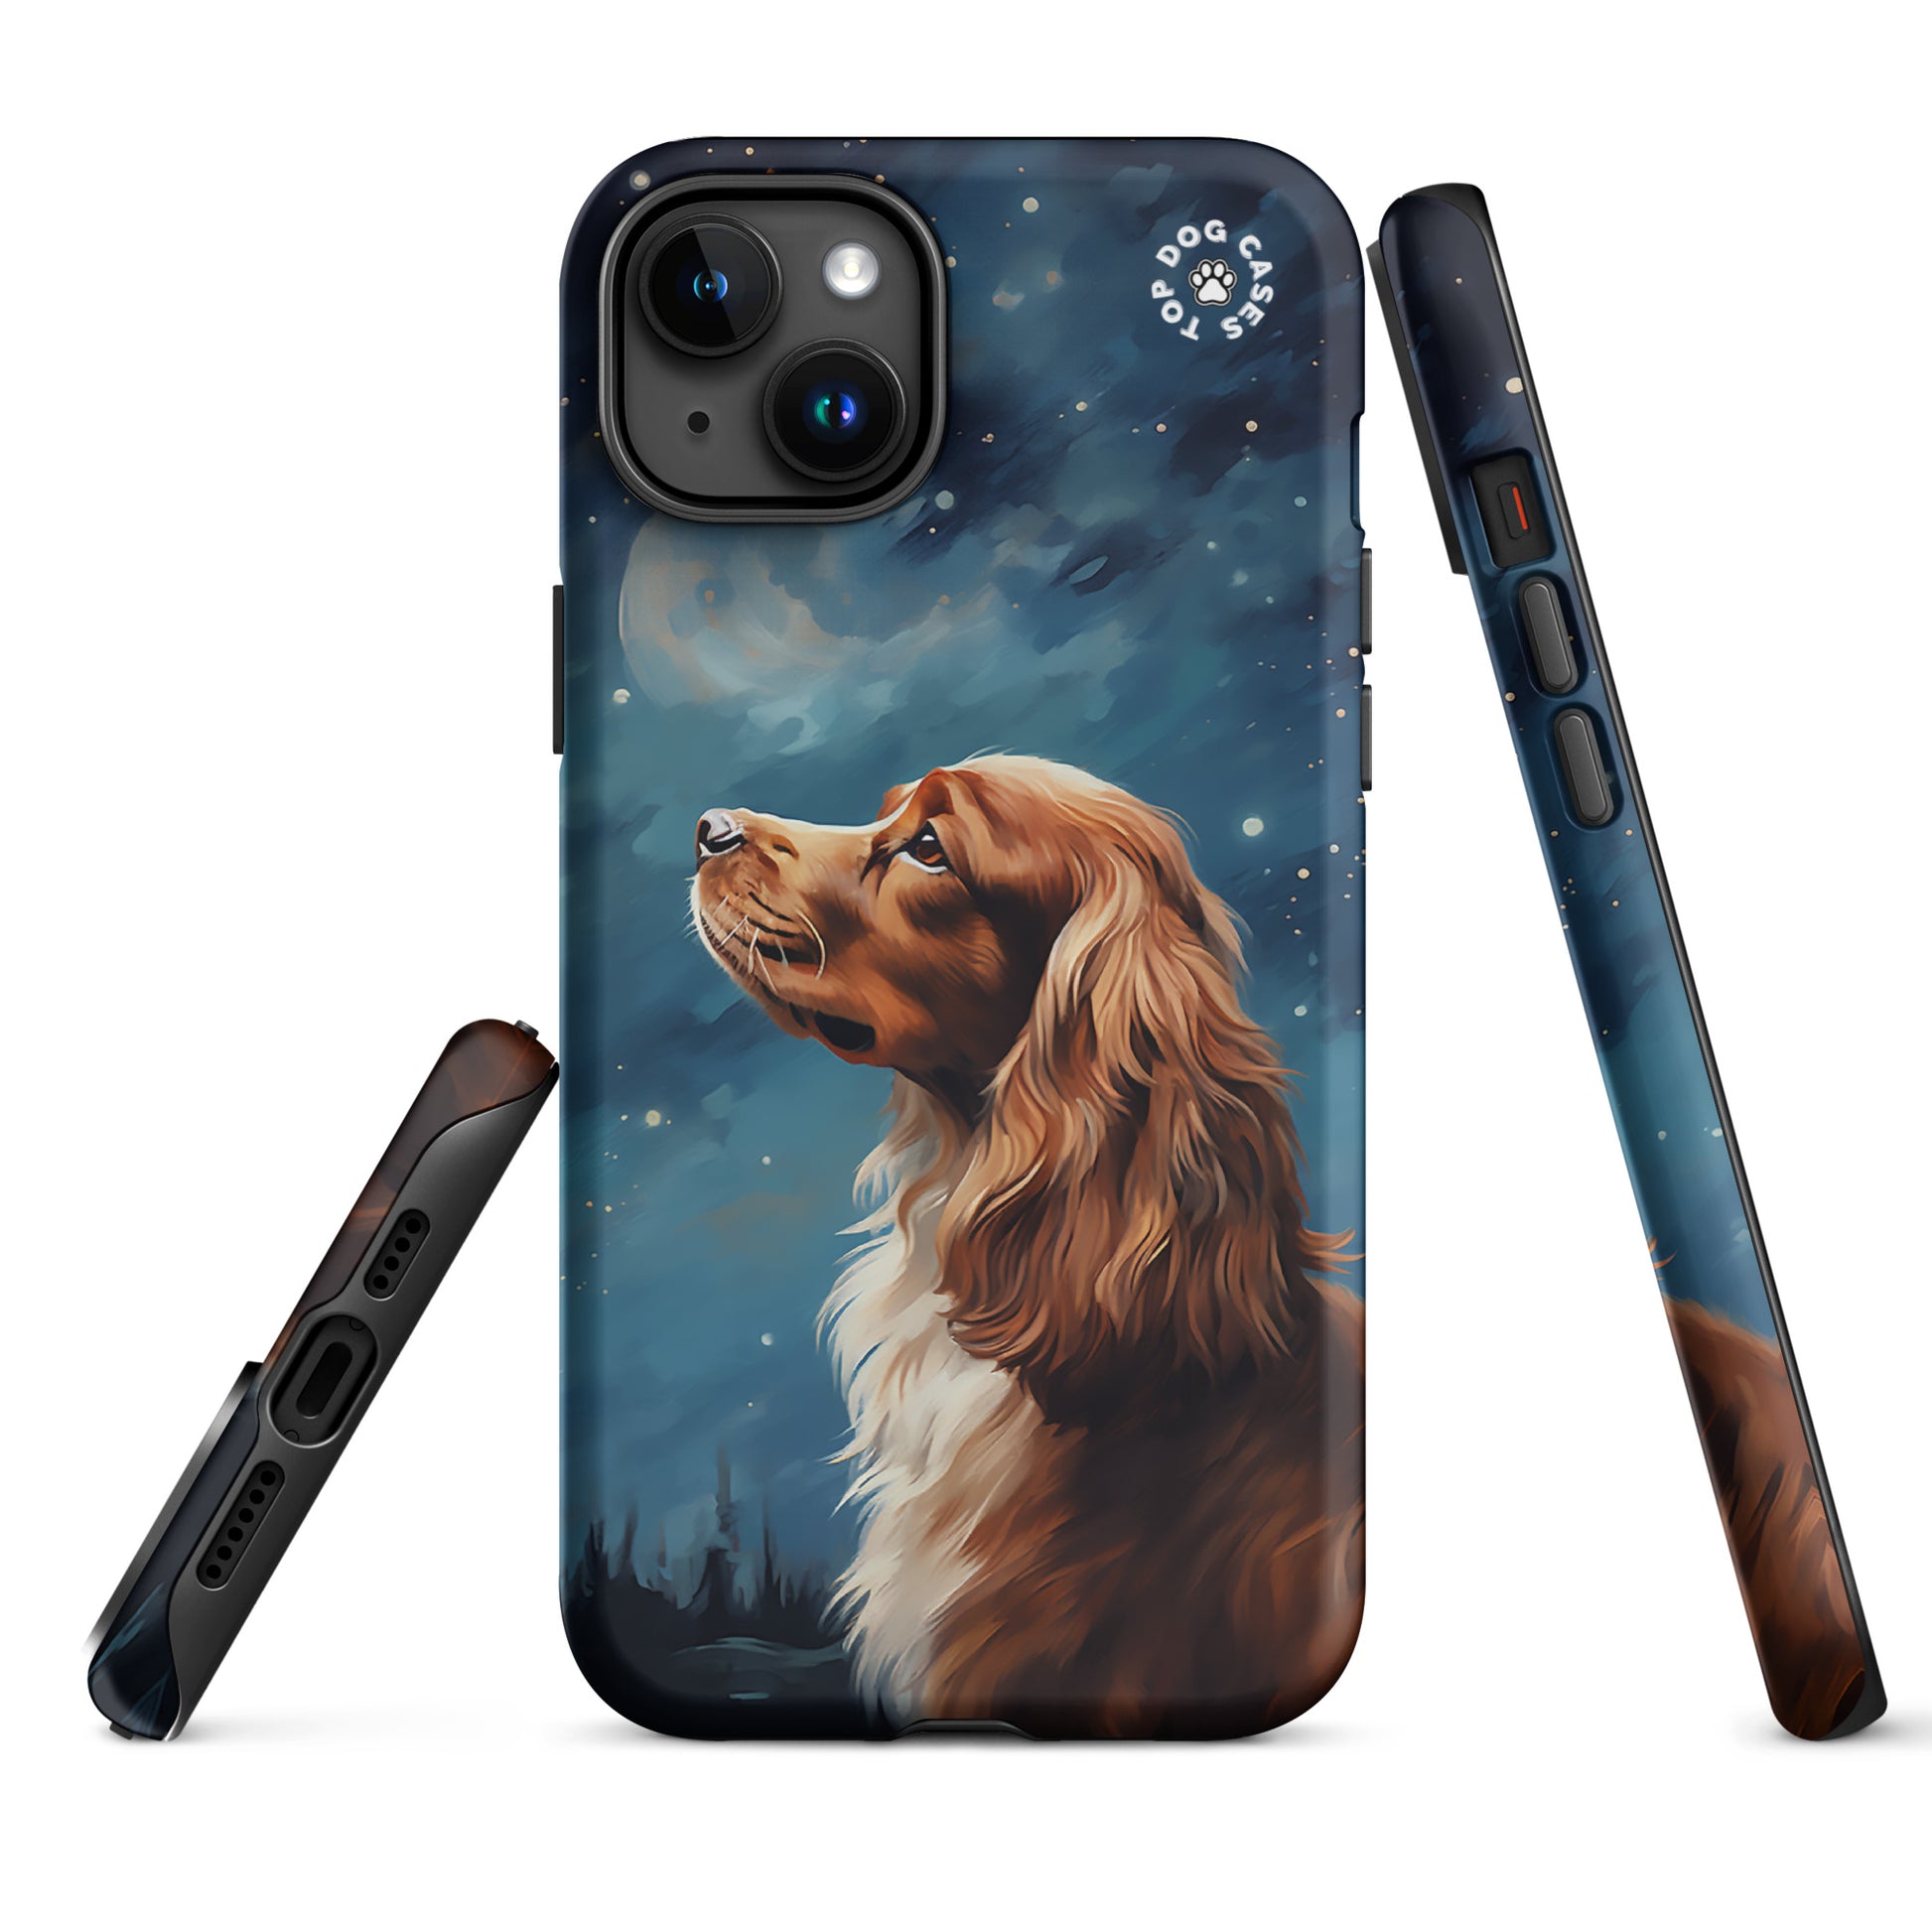 Cute Phone Cases for iPhone 13 - Cocker Spaniel - Top Dog Cases - #Cocker Spaniel, #CockerSpaniel, #CuteDog, #CuteDogs, #CutePhoneCases, #DogPhoneCase, #iPhone13, #iPhone13case, #iPhone13DogCase, #iPhone13Mini, #iPhone13Pro, #iPhone13ProMax